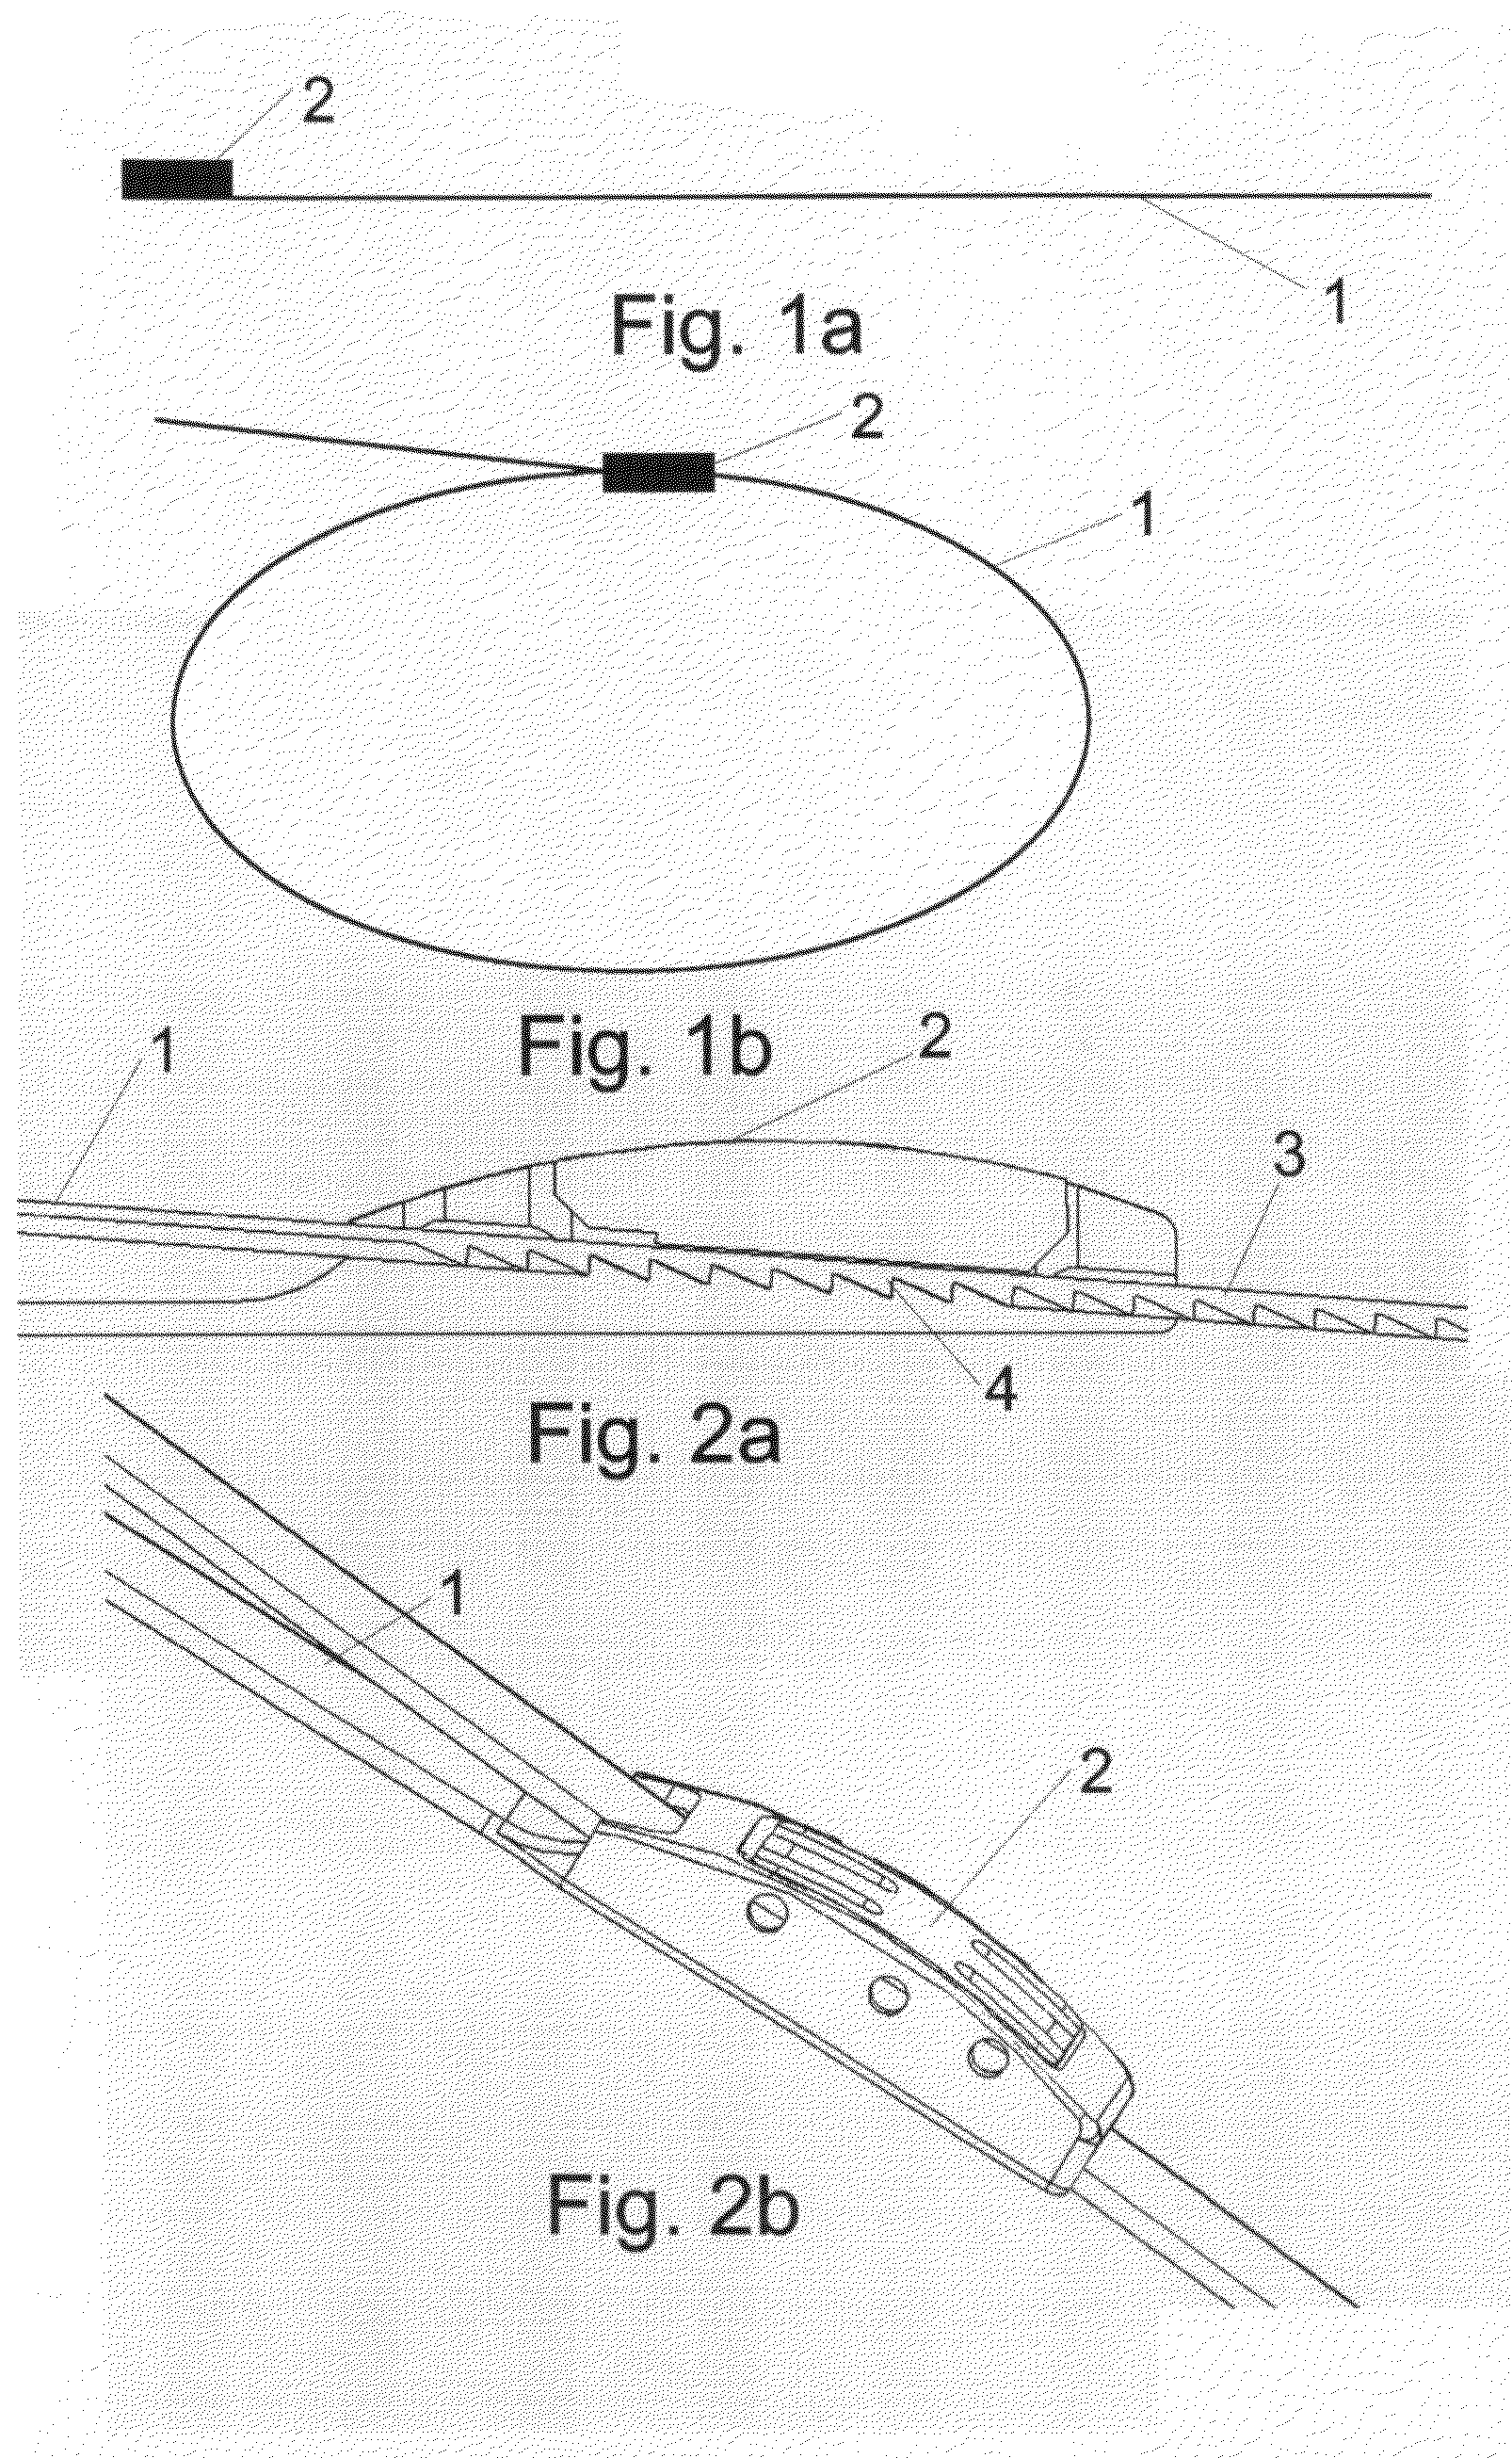 Bioabsorbable band system,a bioabsorbable band, a method for producing a bioabsorbable band, a needle system of a bioabsorbable band and a locking mechanism